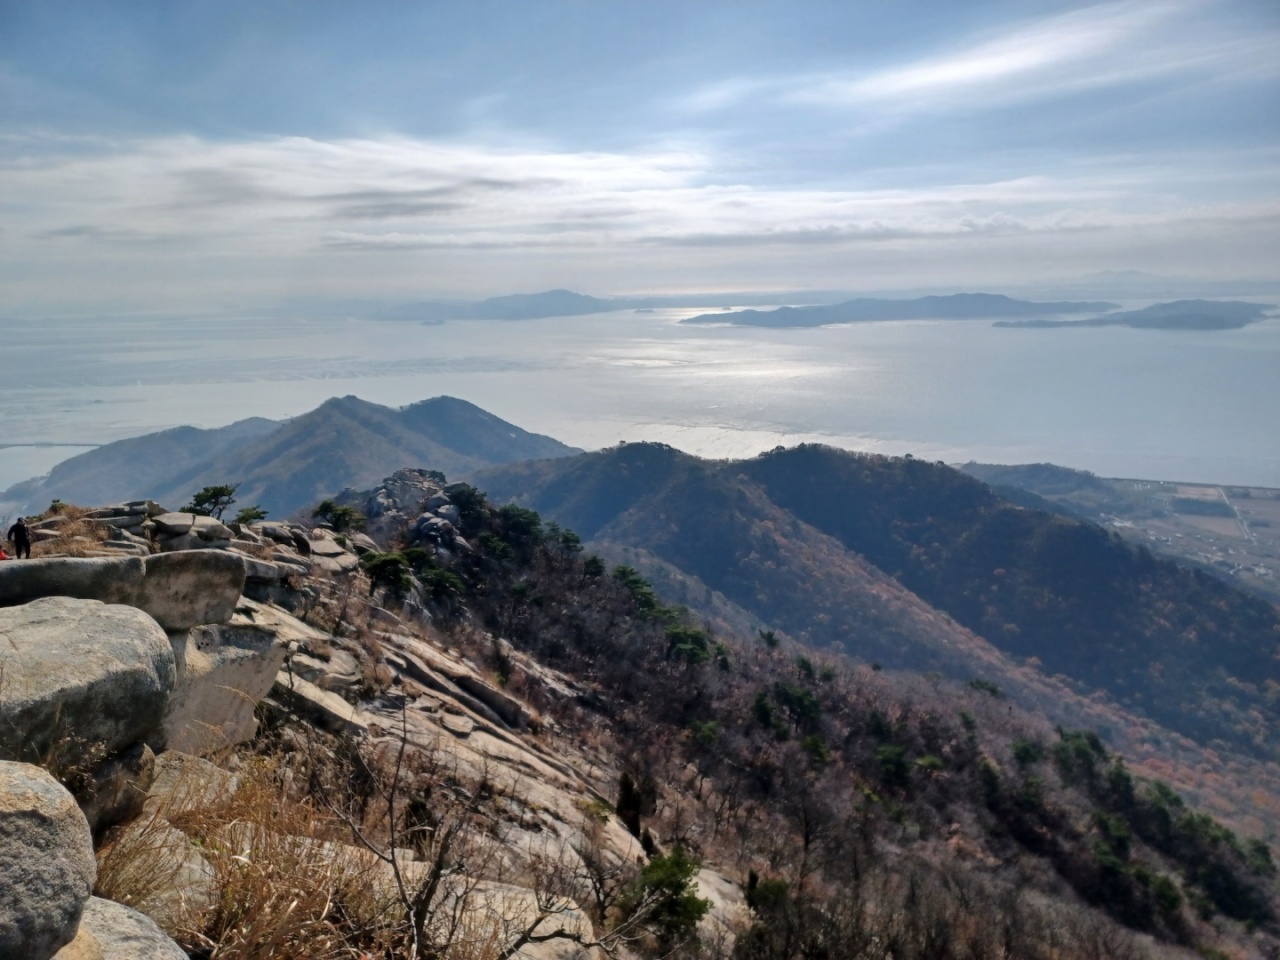 A spectacular view of the surrounding mountain peaks and the Yellow Sea can be seen from the top of Manisan. (Lee Si-jin/The Korea Herald)